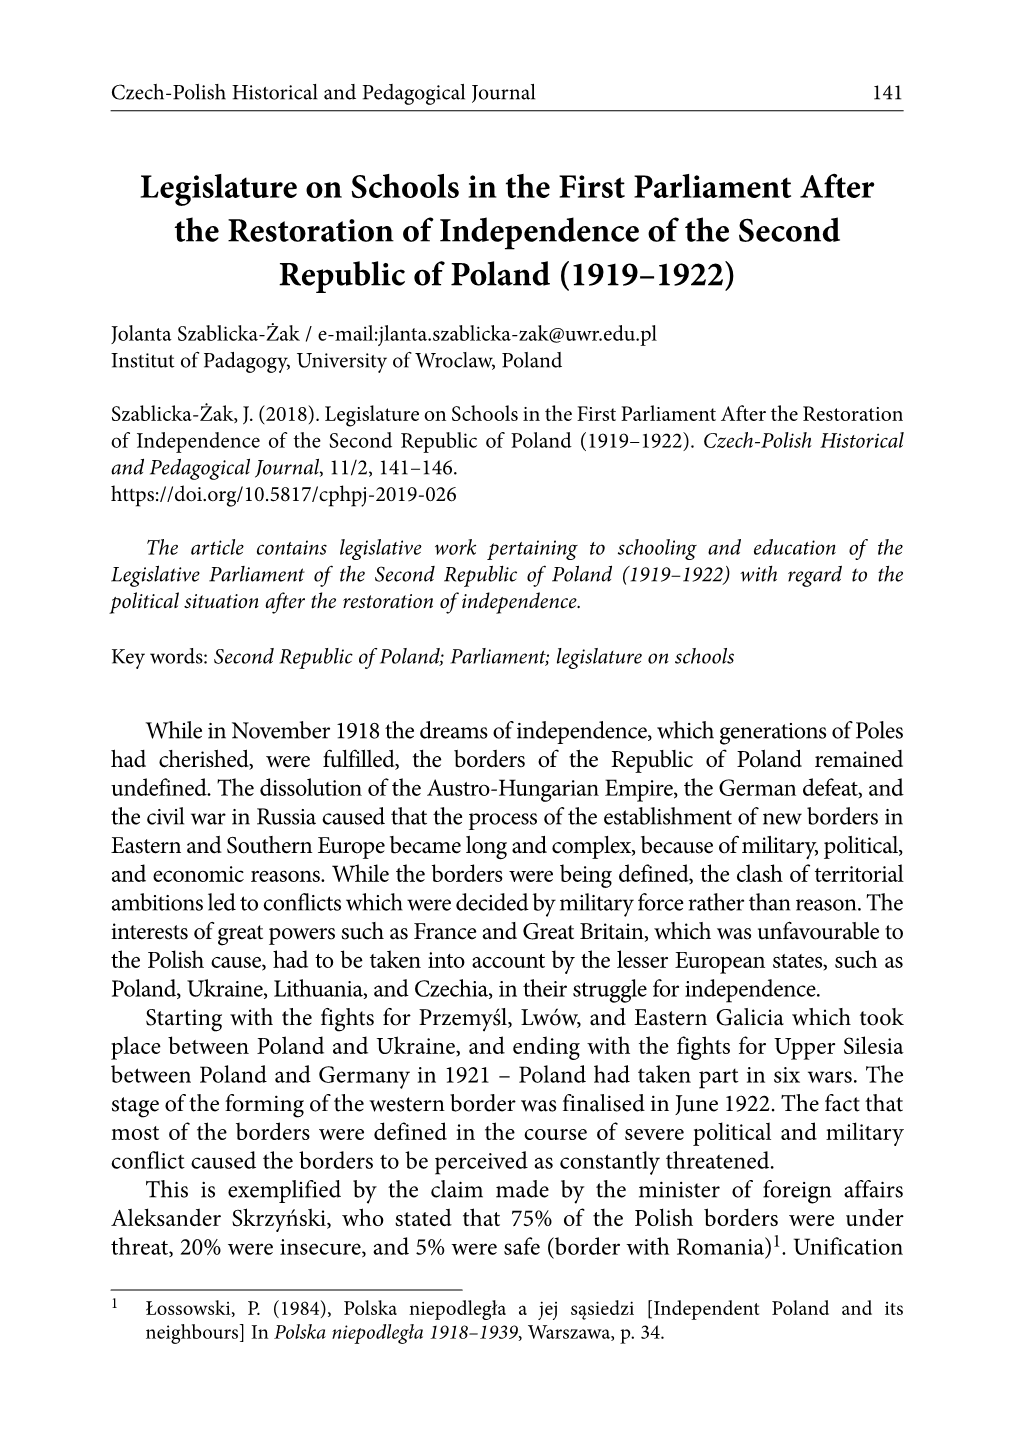 Legislature on Schools in the First Parliament After the Restoration of Independence of the Second Republic of Poland (1919–1922)